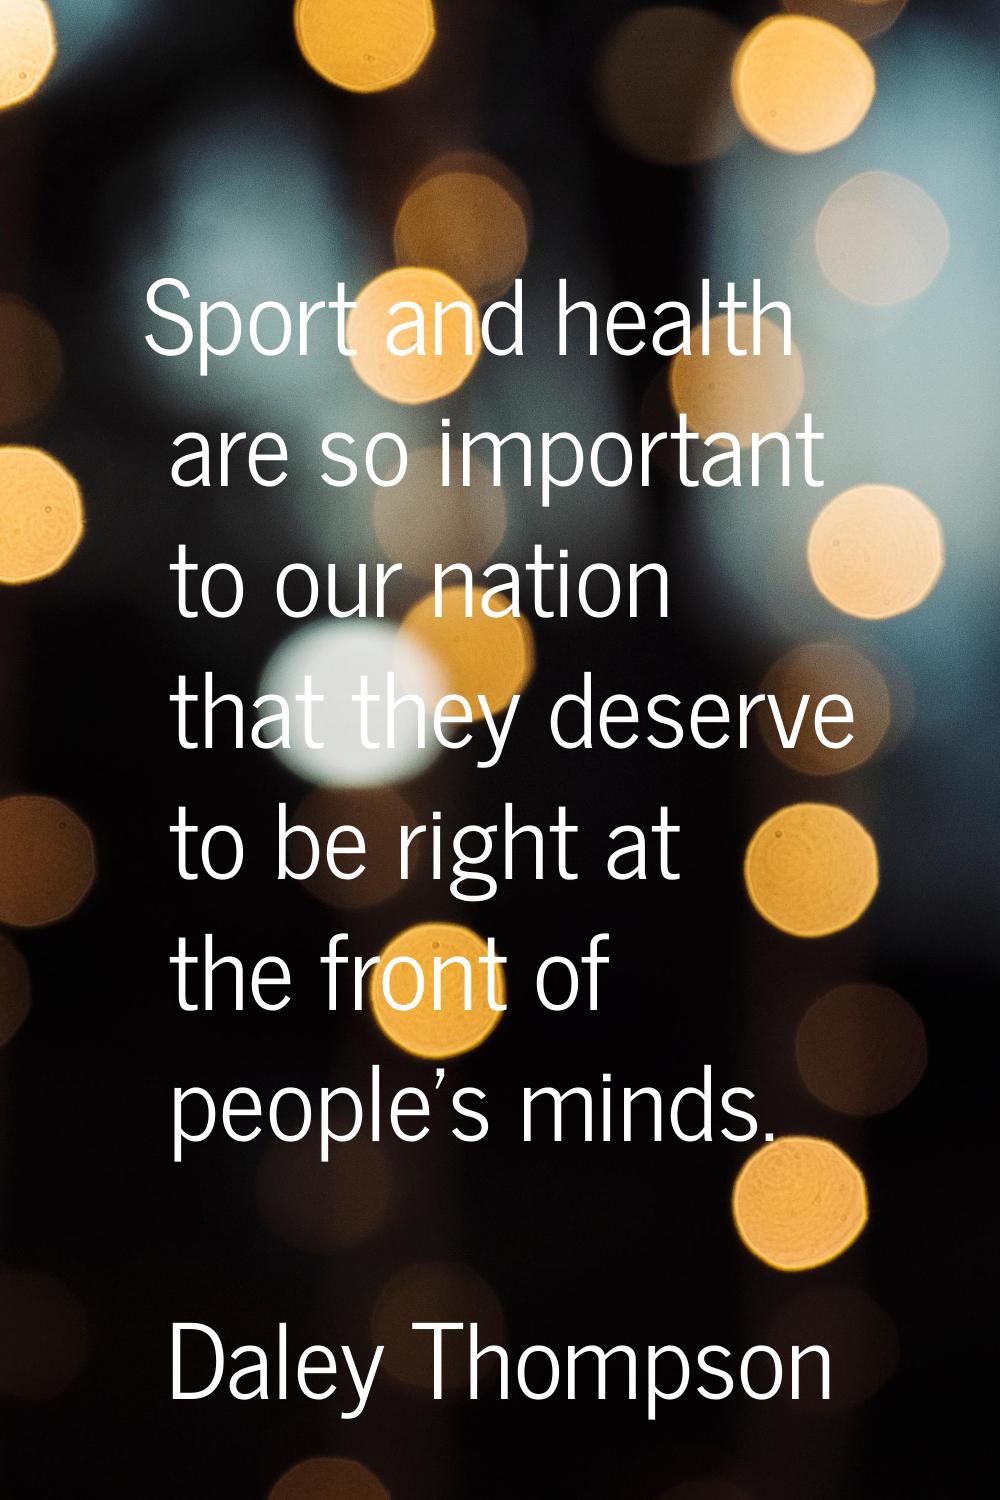 Sport and health are so important to our nation that they deserve to be right at the front of peopl